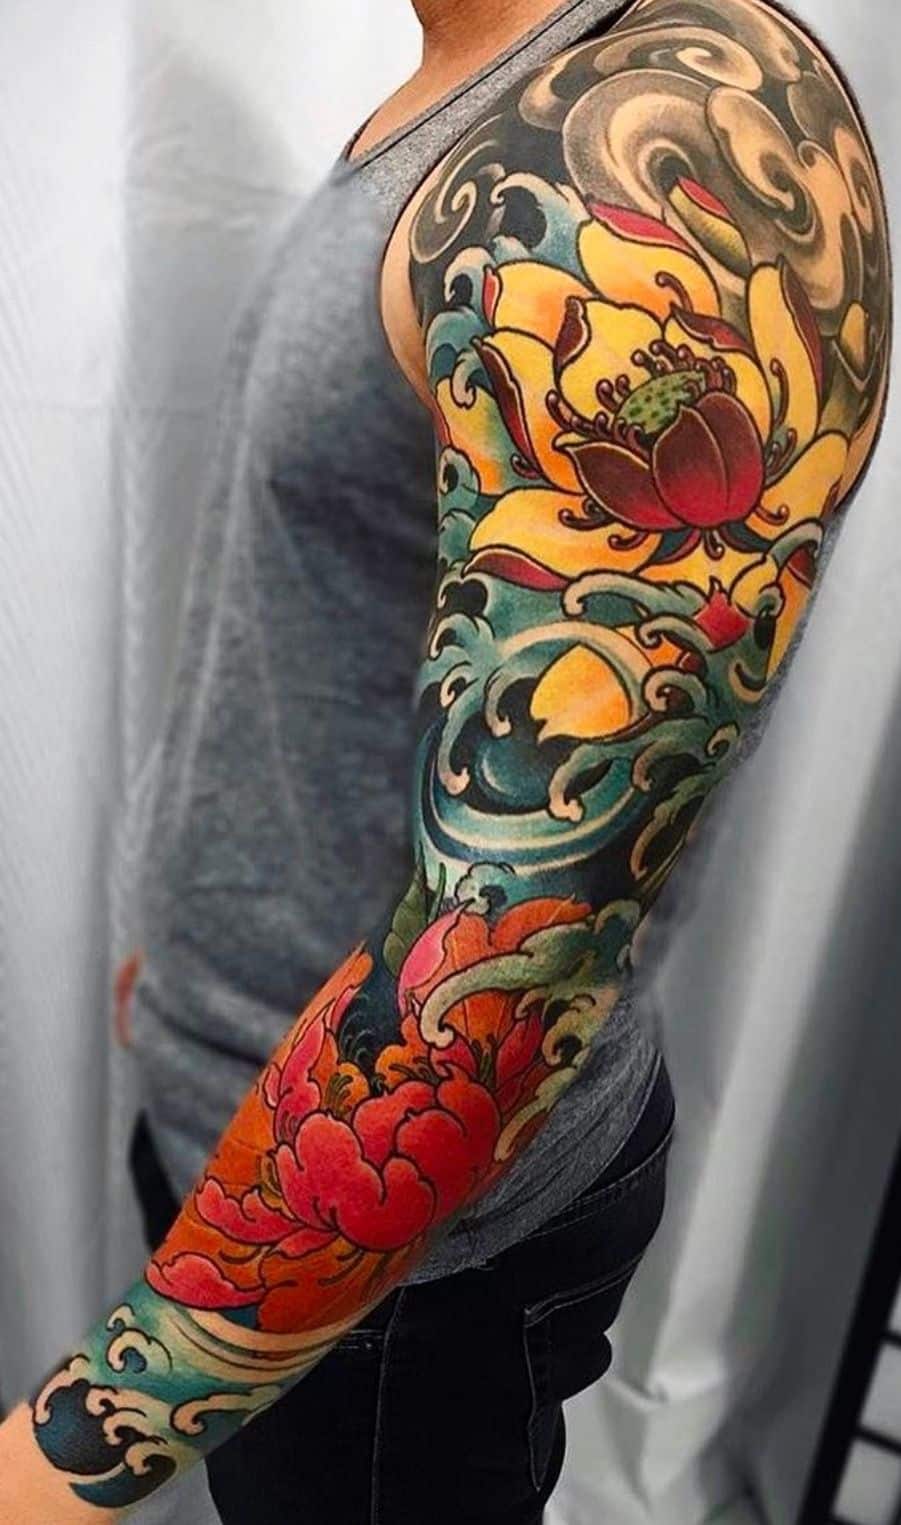 Cross Cultural Connections Neo Japanese Tattoos  Tattoodo